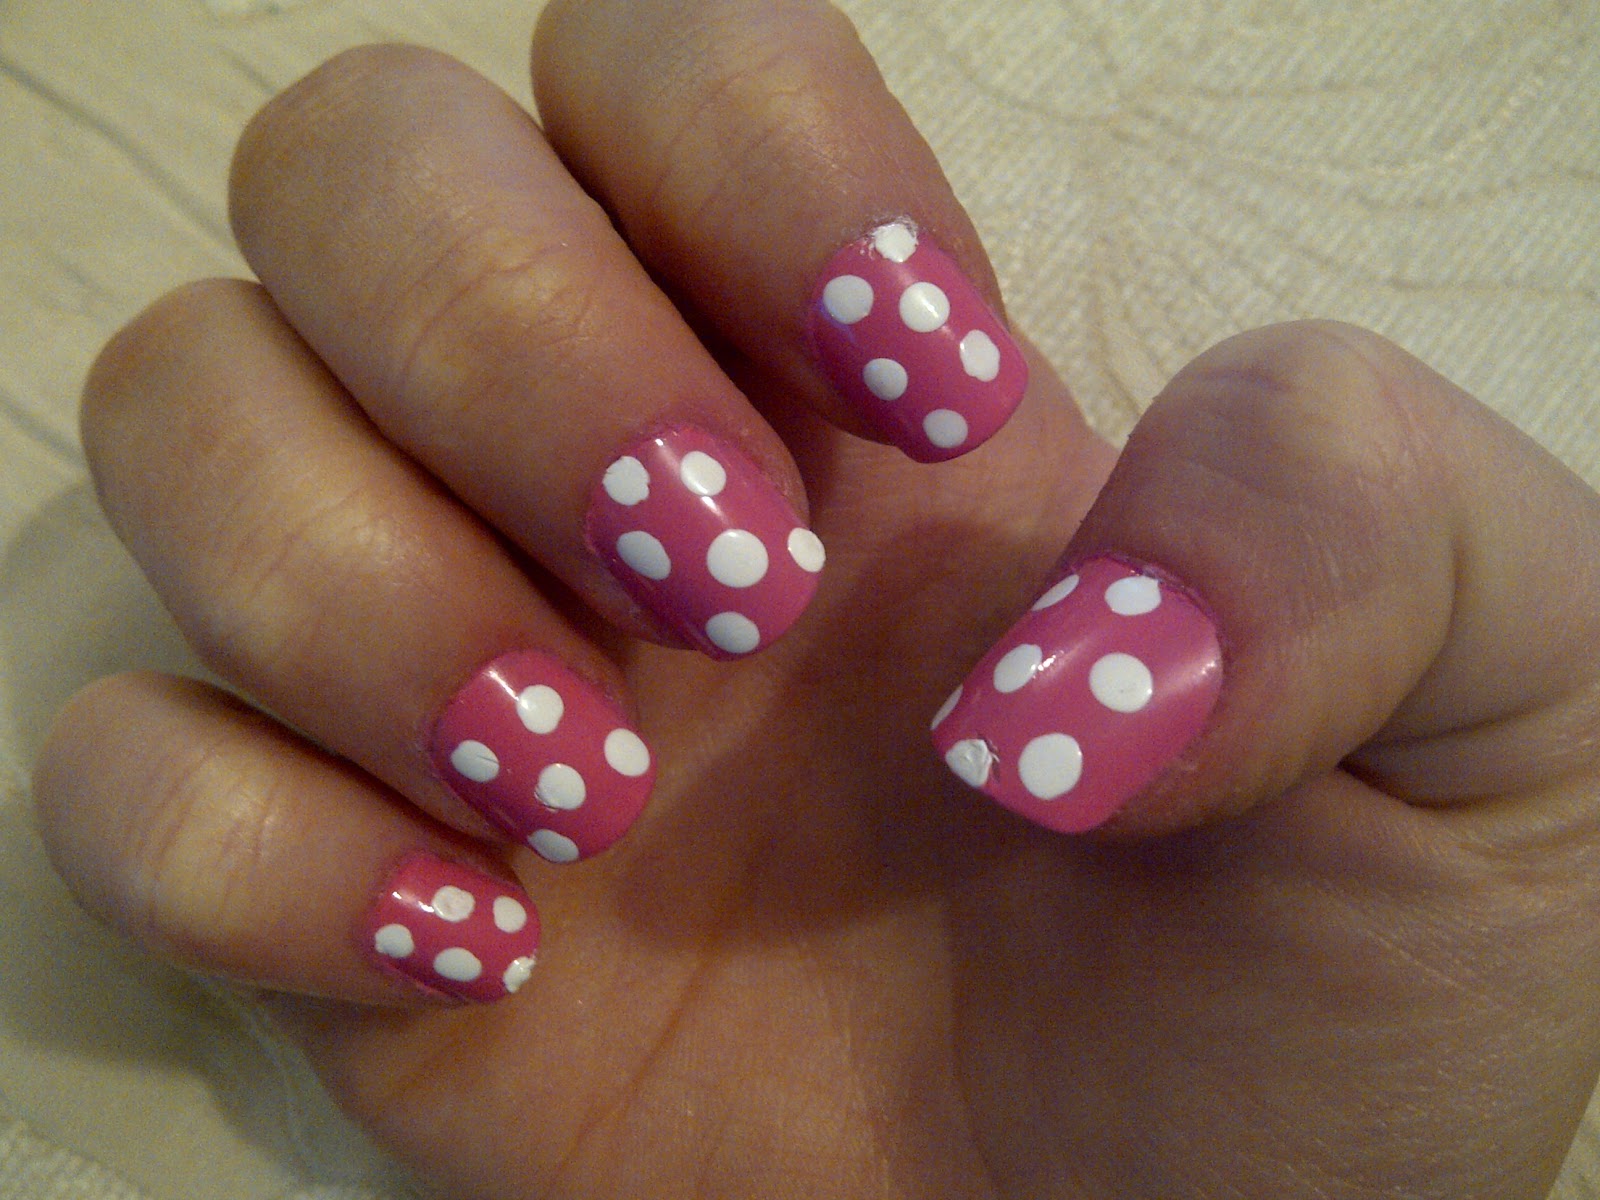 2. 50+ Minnie Mouse Nail Art Designs - wide 5